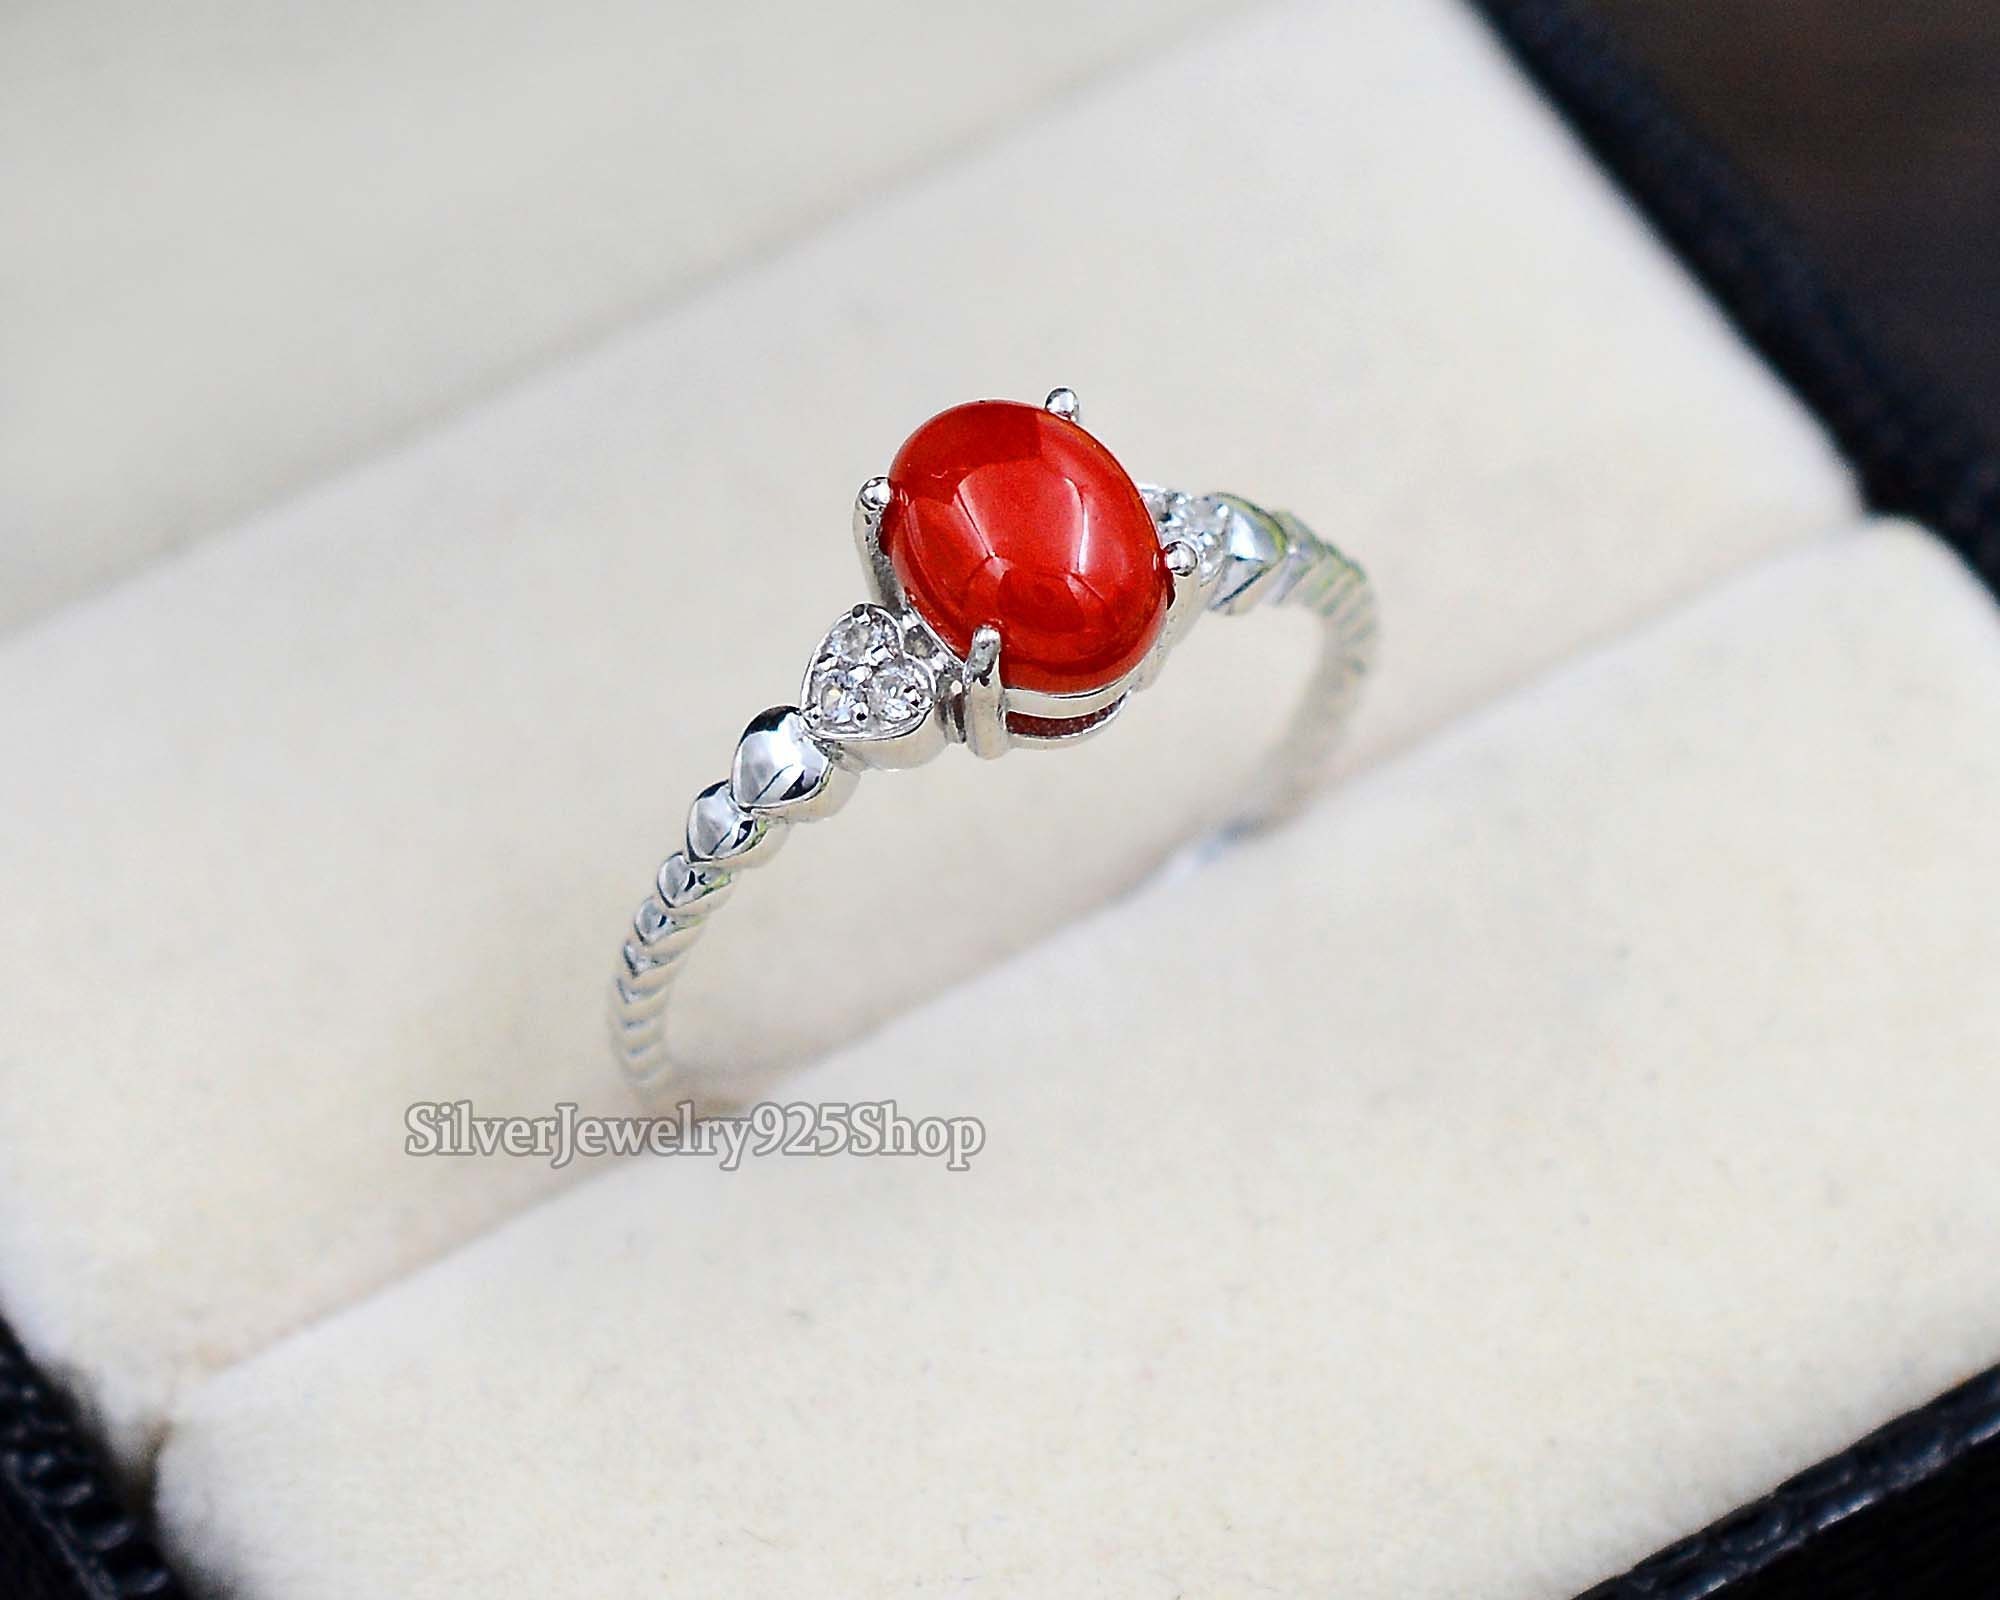 Red coral pearl Sterling silver gemstone ring at ₹9550 | Azilaa